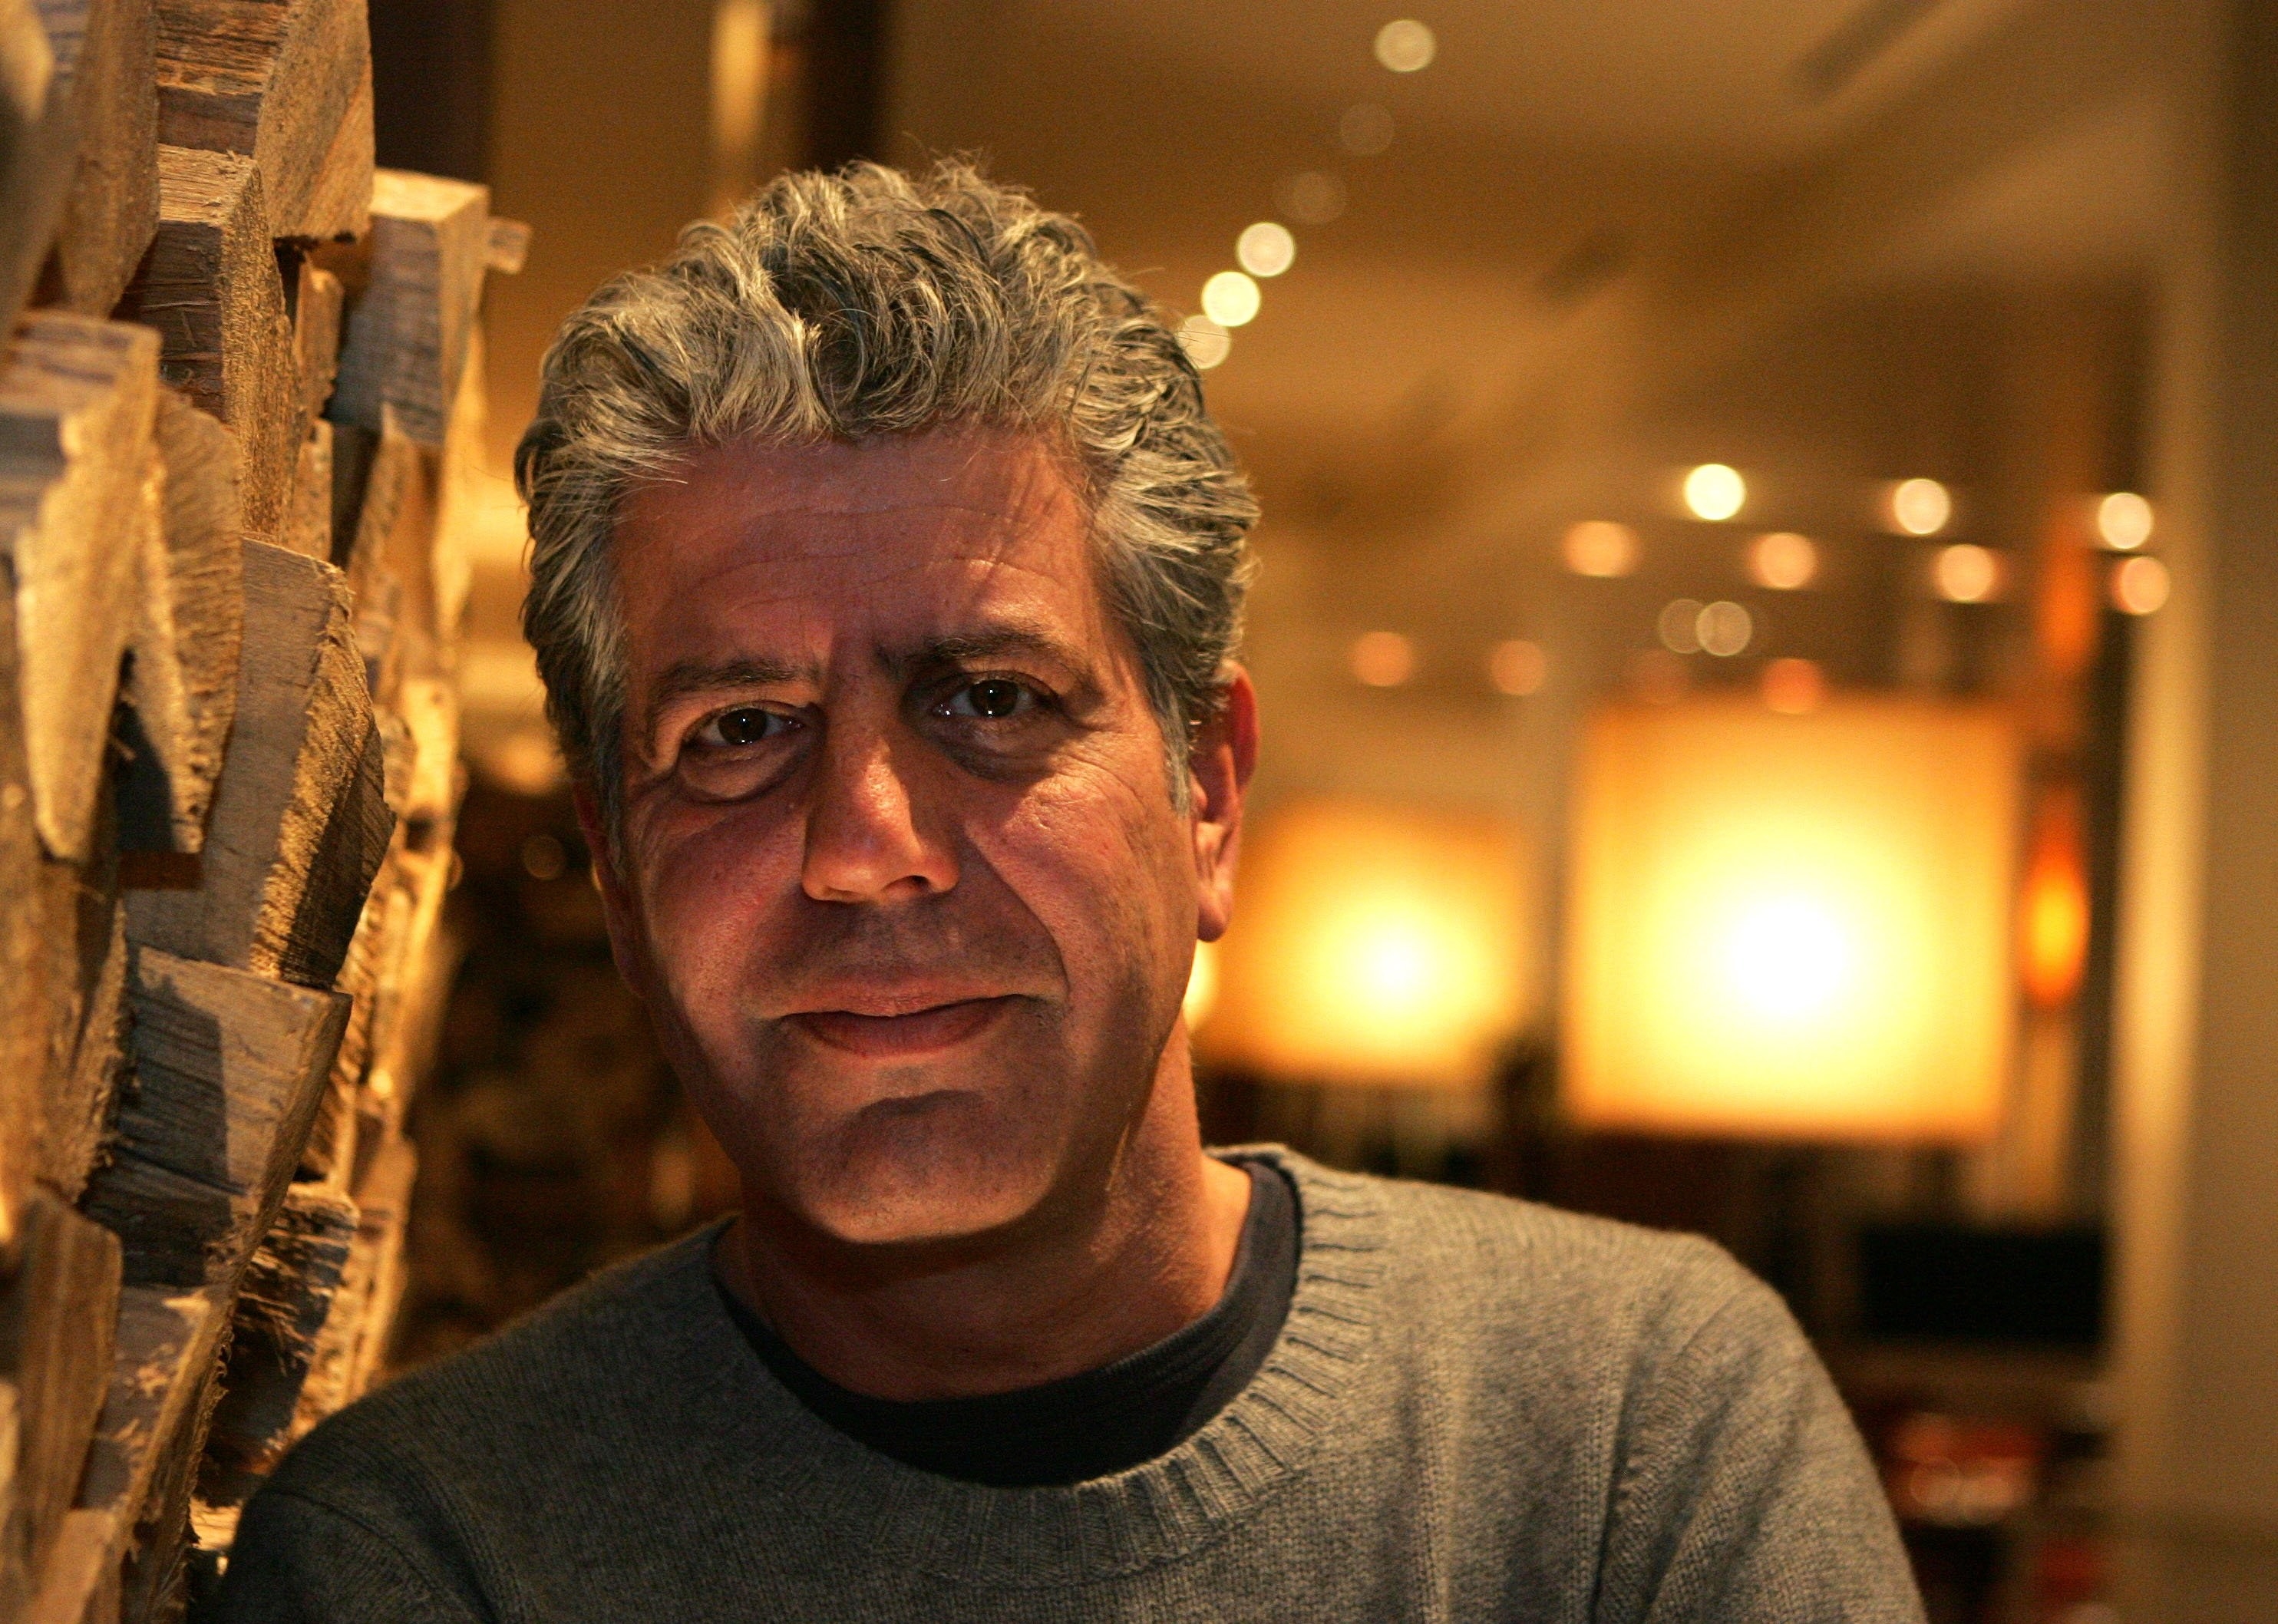 Closeup photo of Anthony Bourdain in a restaurant leaning against a woodpile and looking at the camera